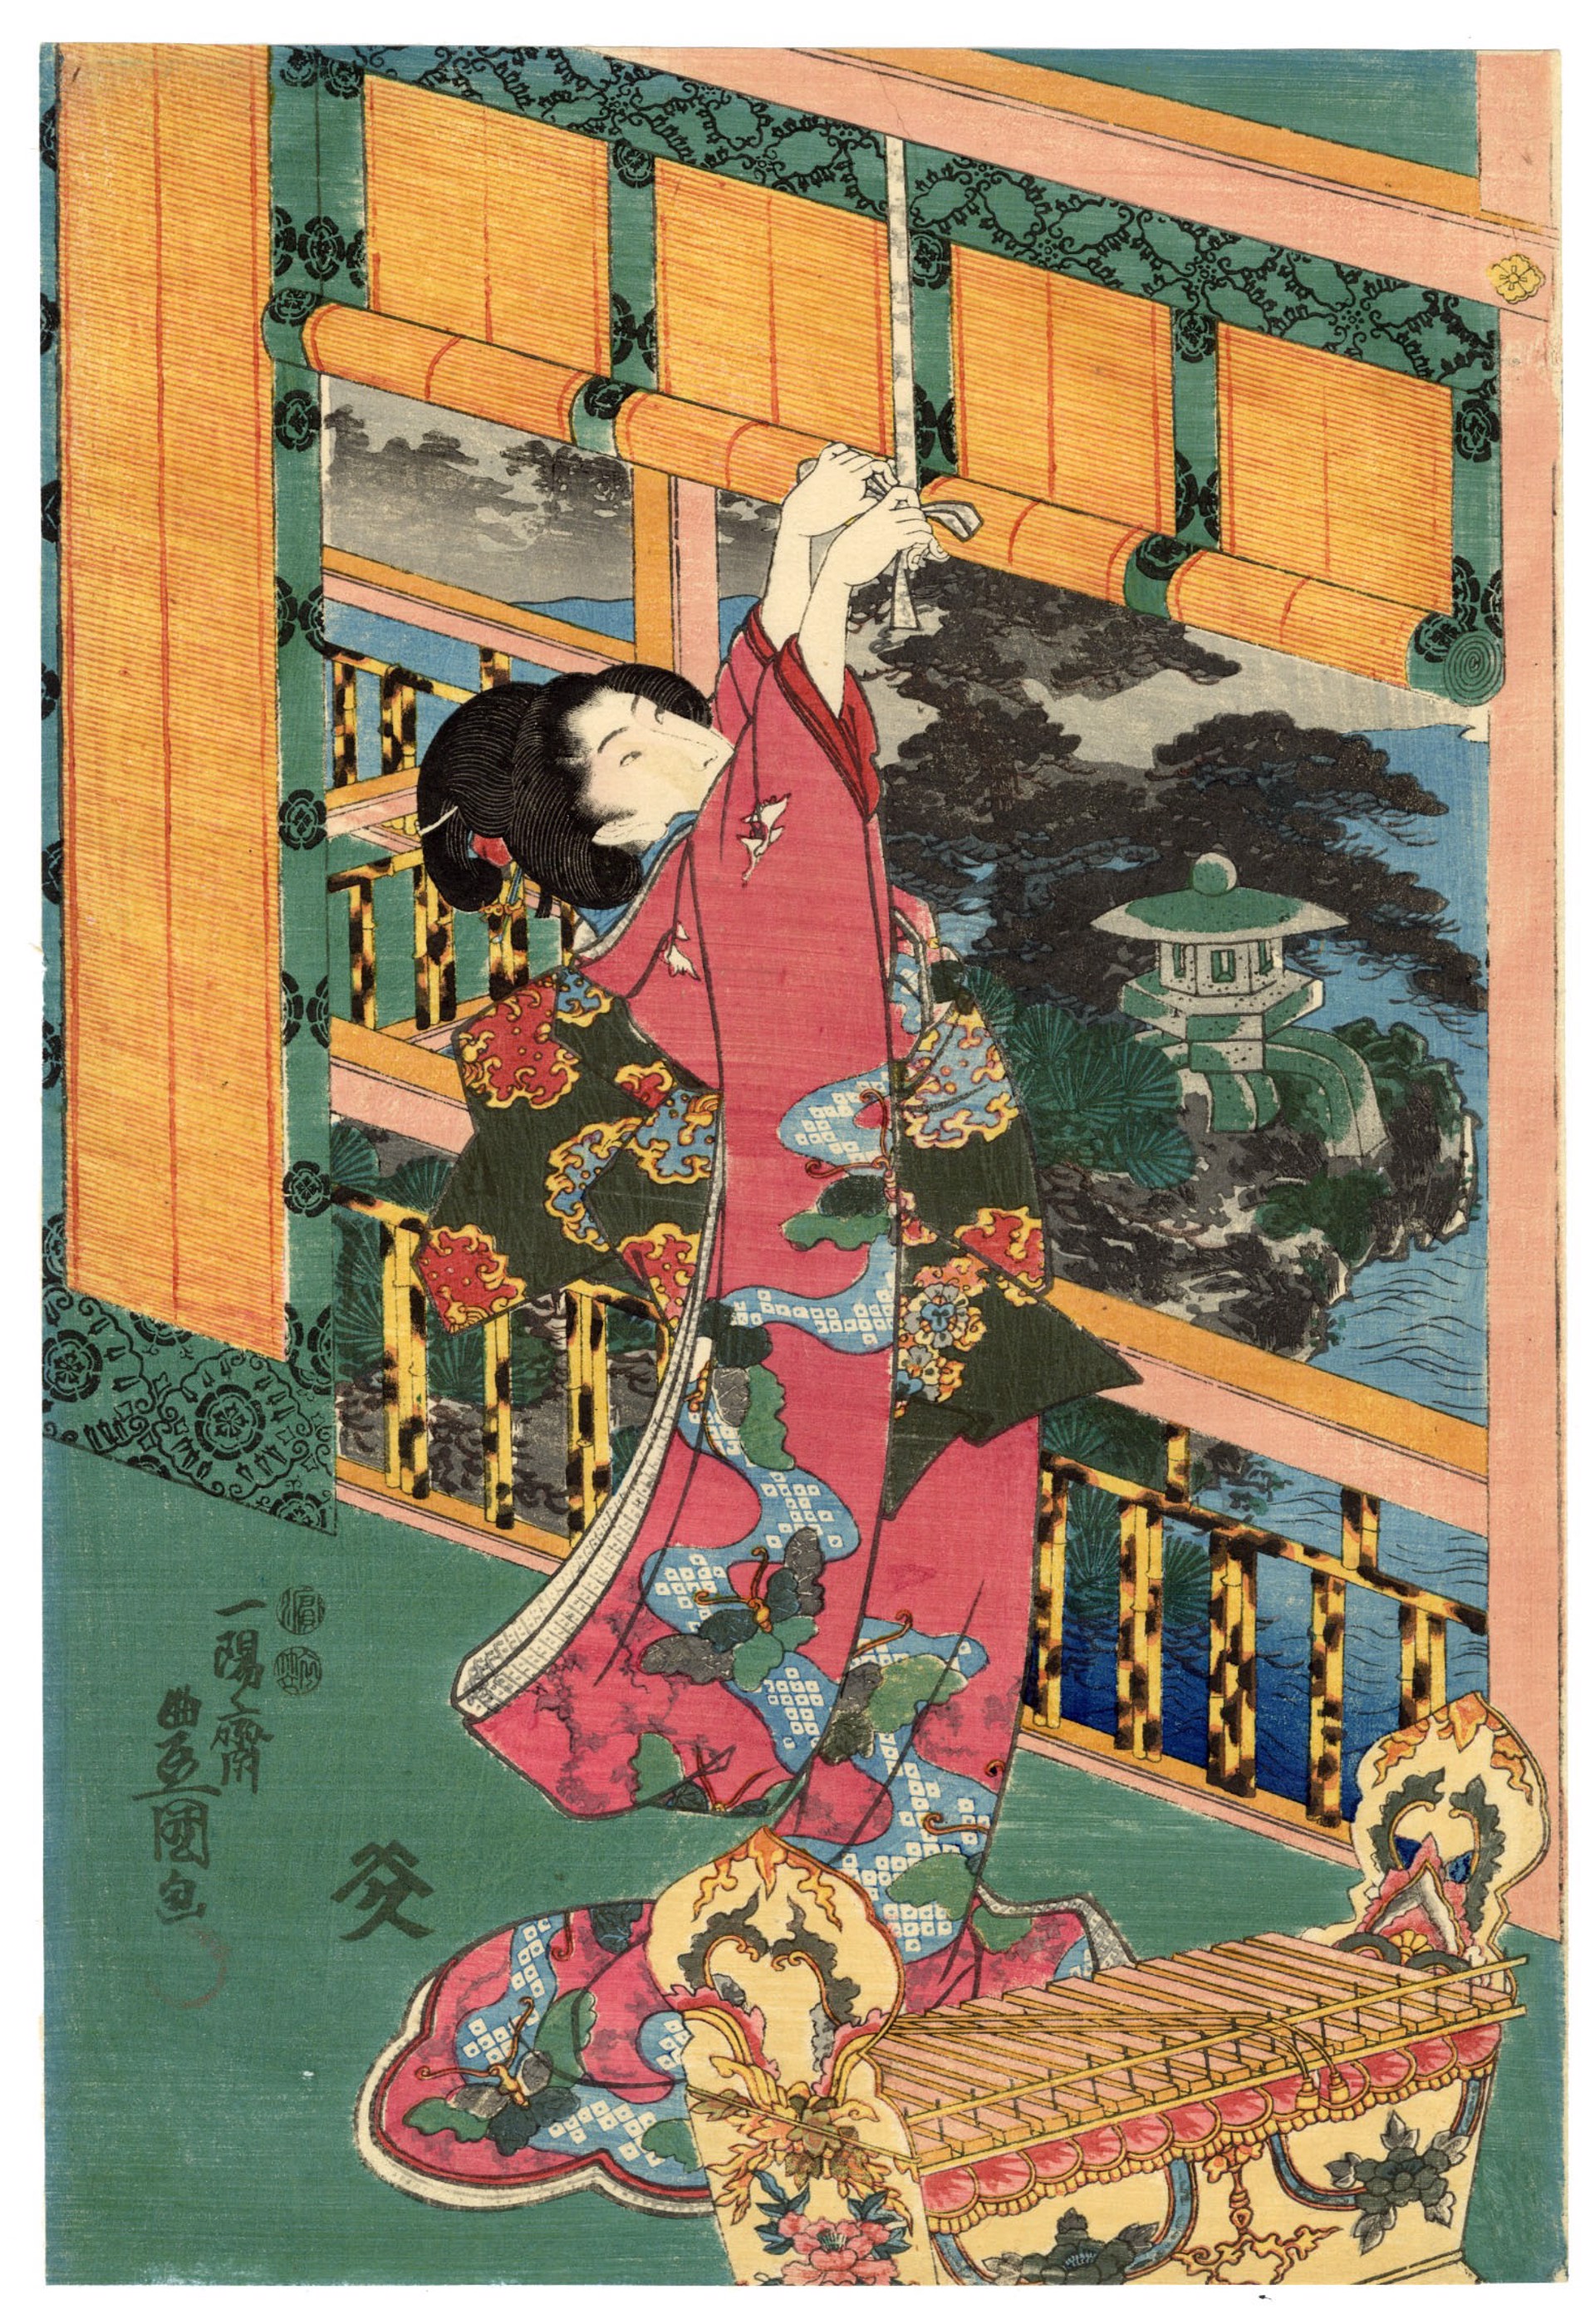 Moon Flowers and Birds, Wind and Moon by Kunisada